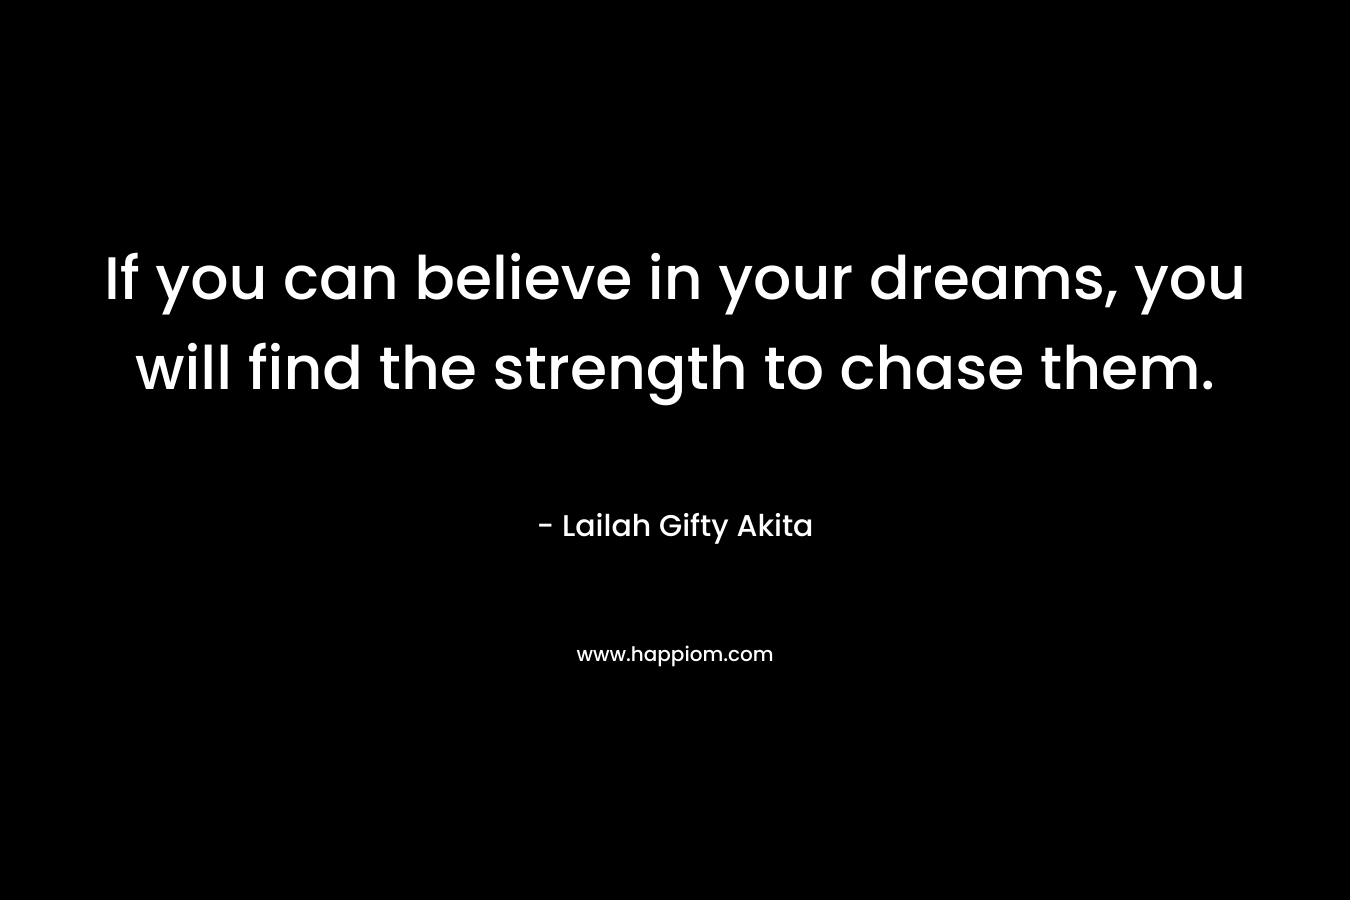 If you can believe in your dreams, you will find the strength to chase them.